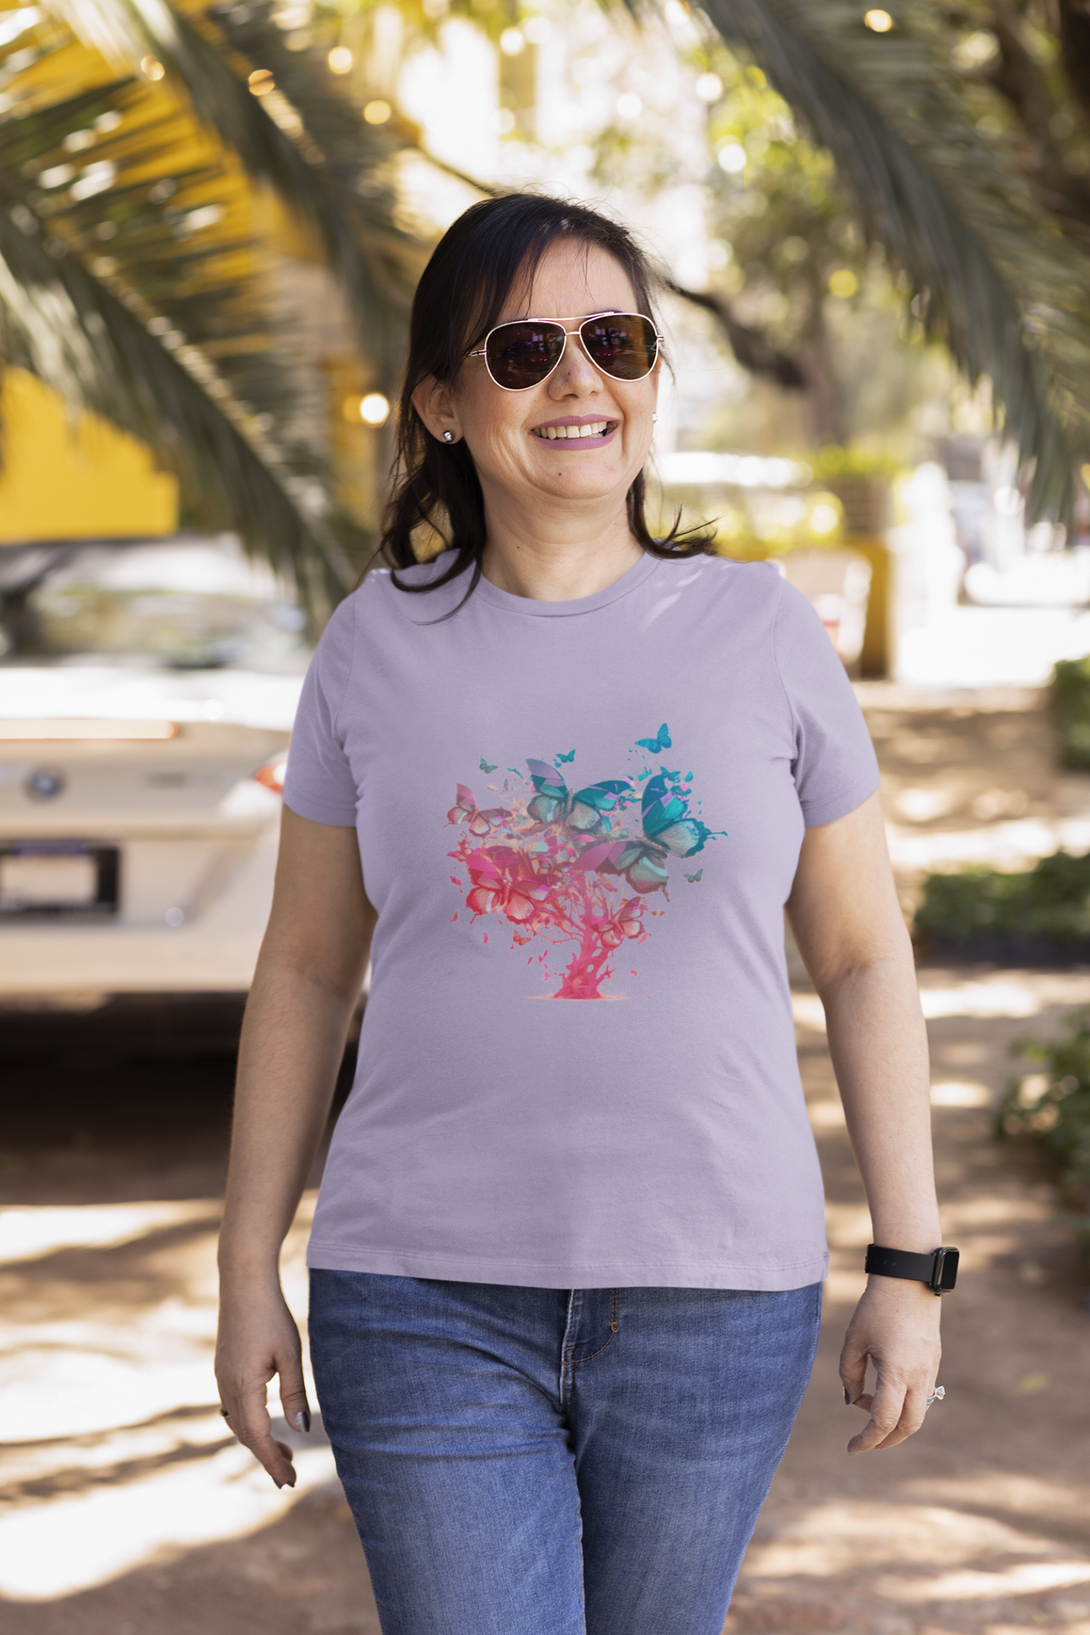 Butterfly Tree Printed T-Shirt For Women - WowWaves - 6